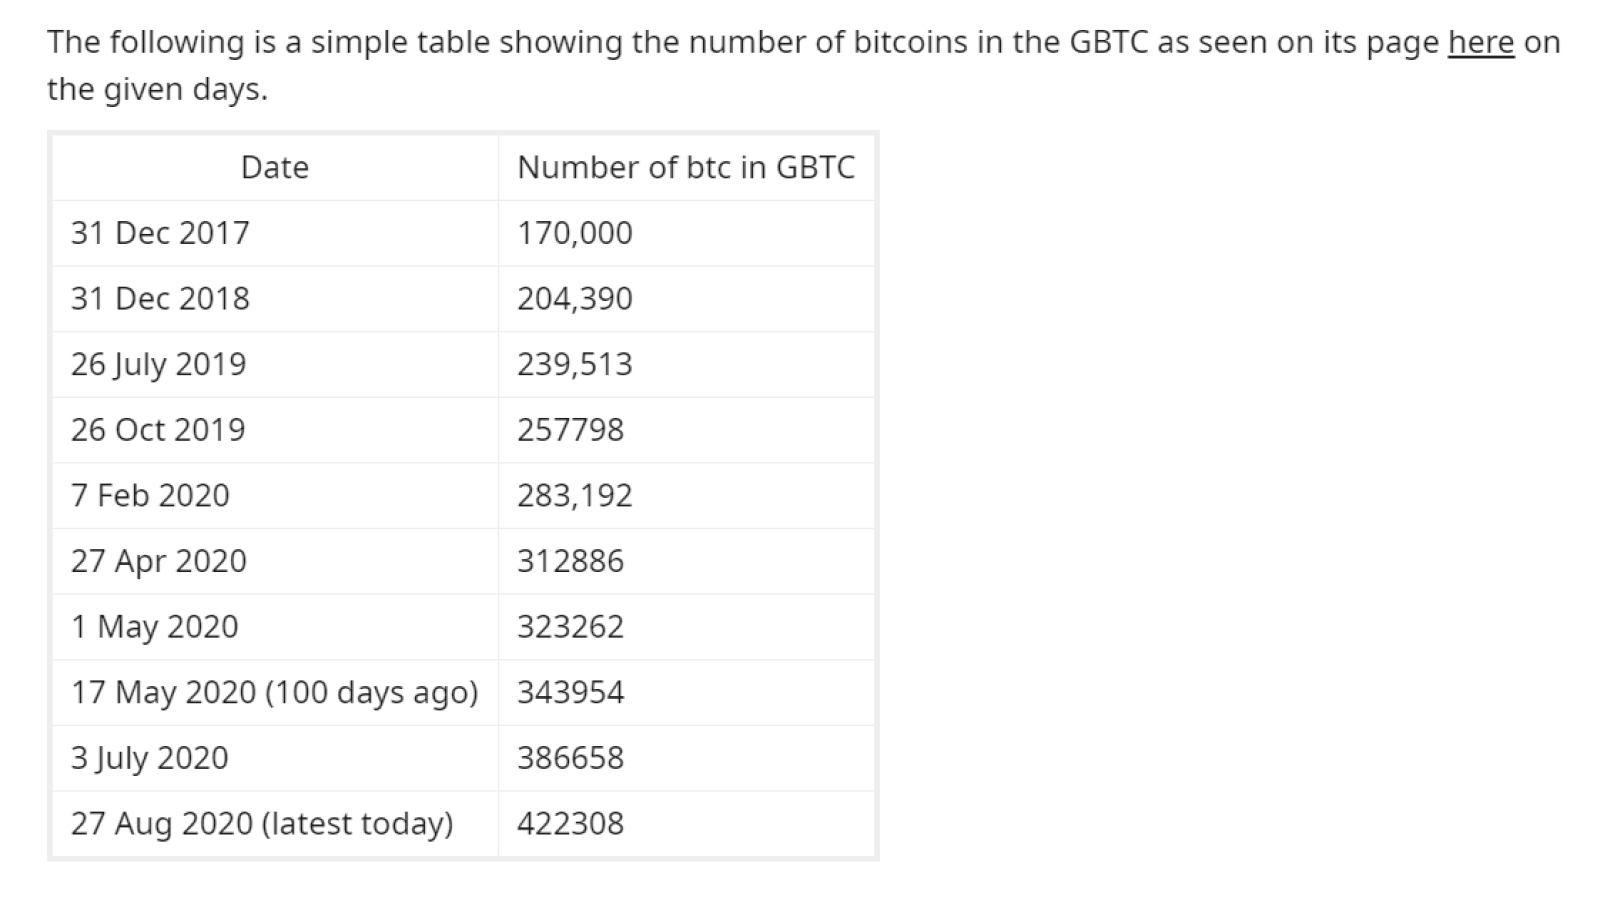 The number of BTC in the Grayscale Bitcoin trust